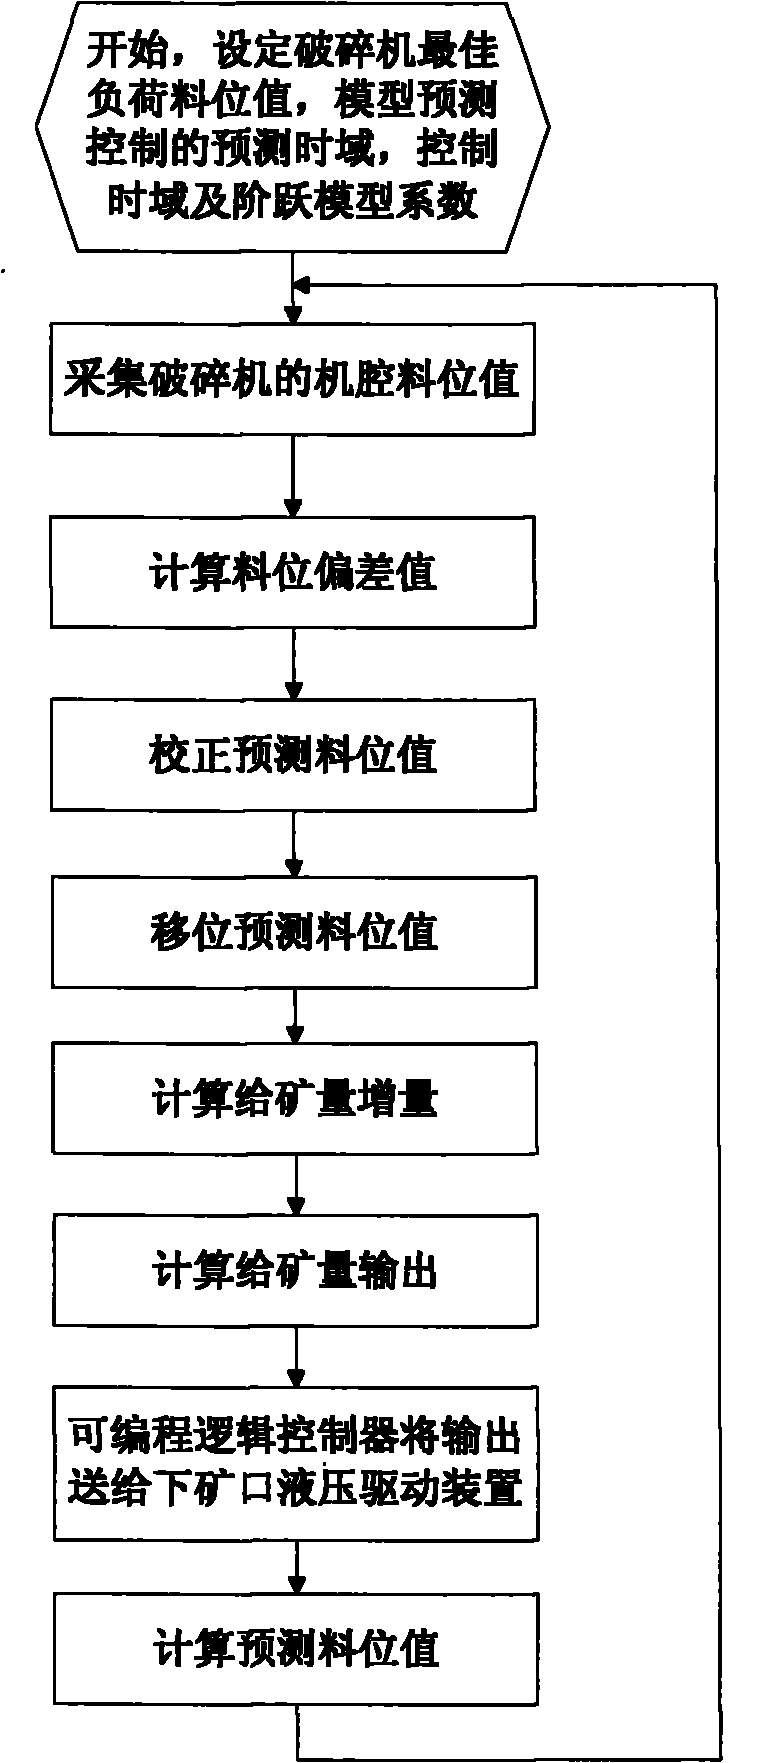 Device and method for automatically controlling choke feed of conical crusher